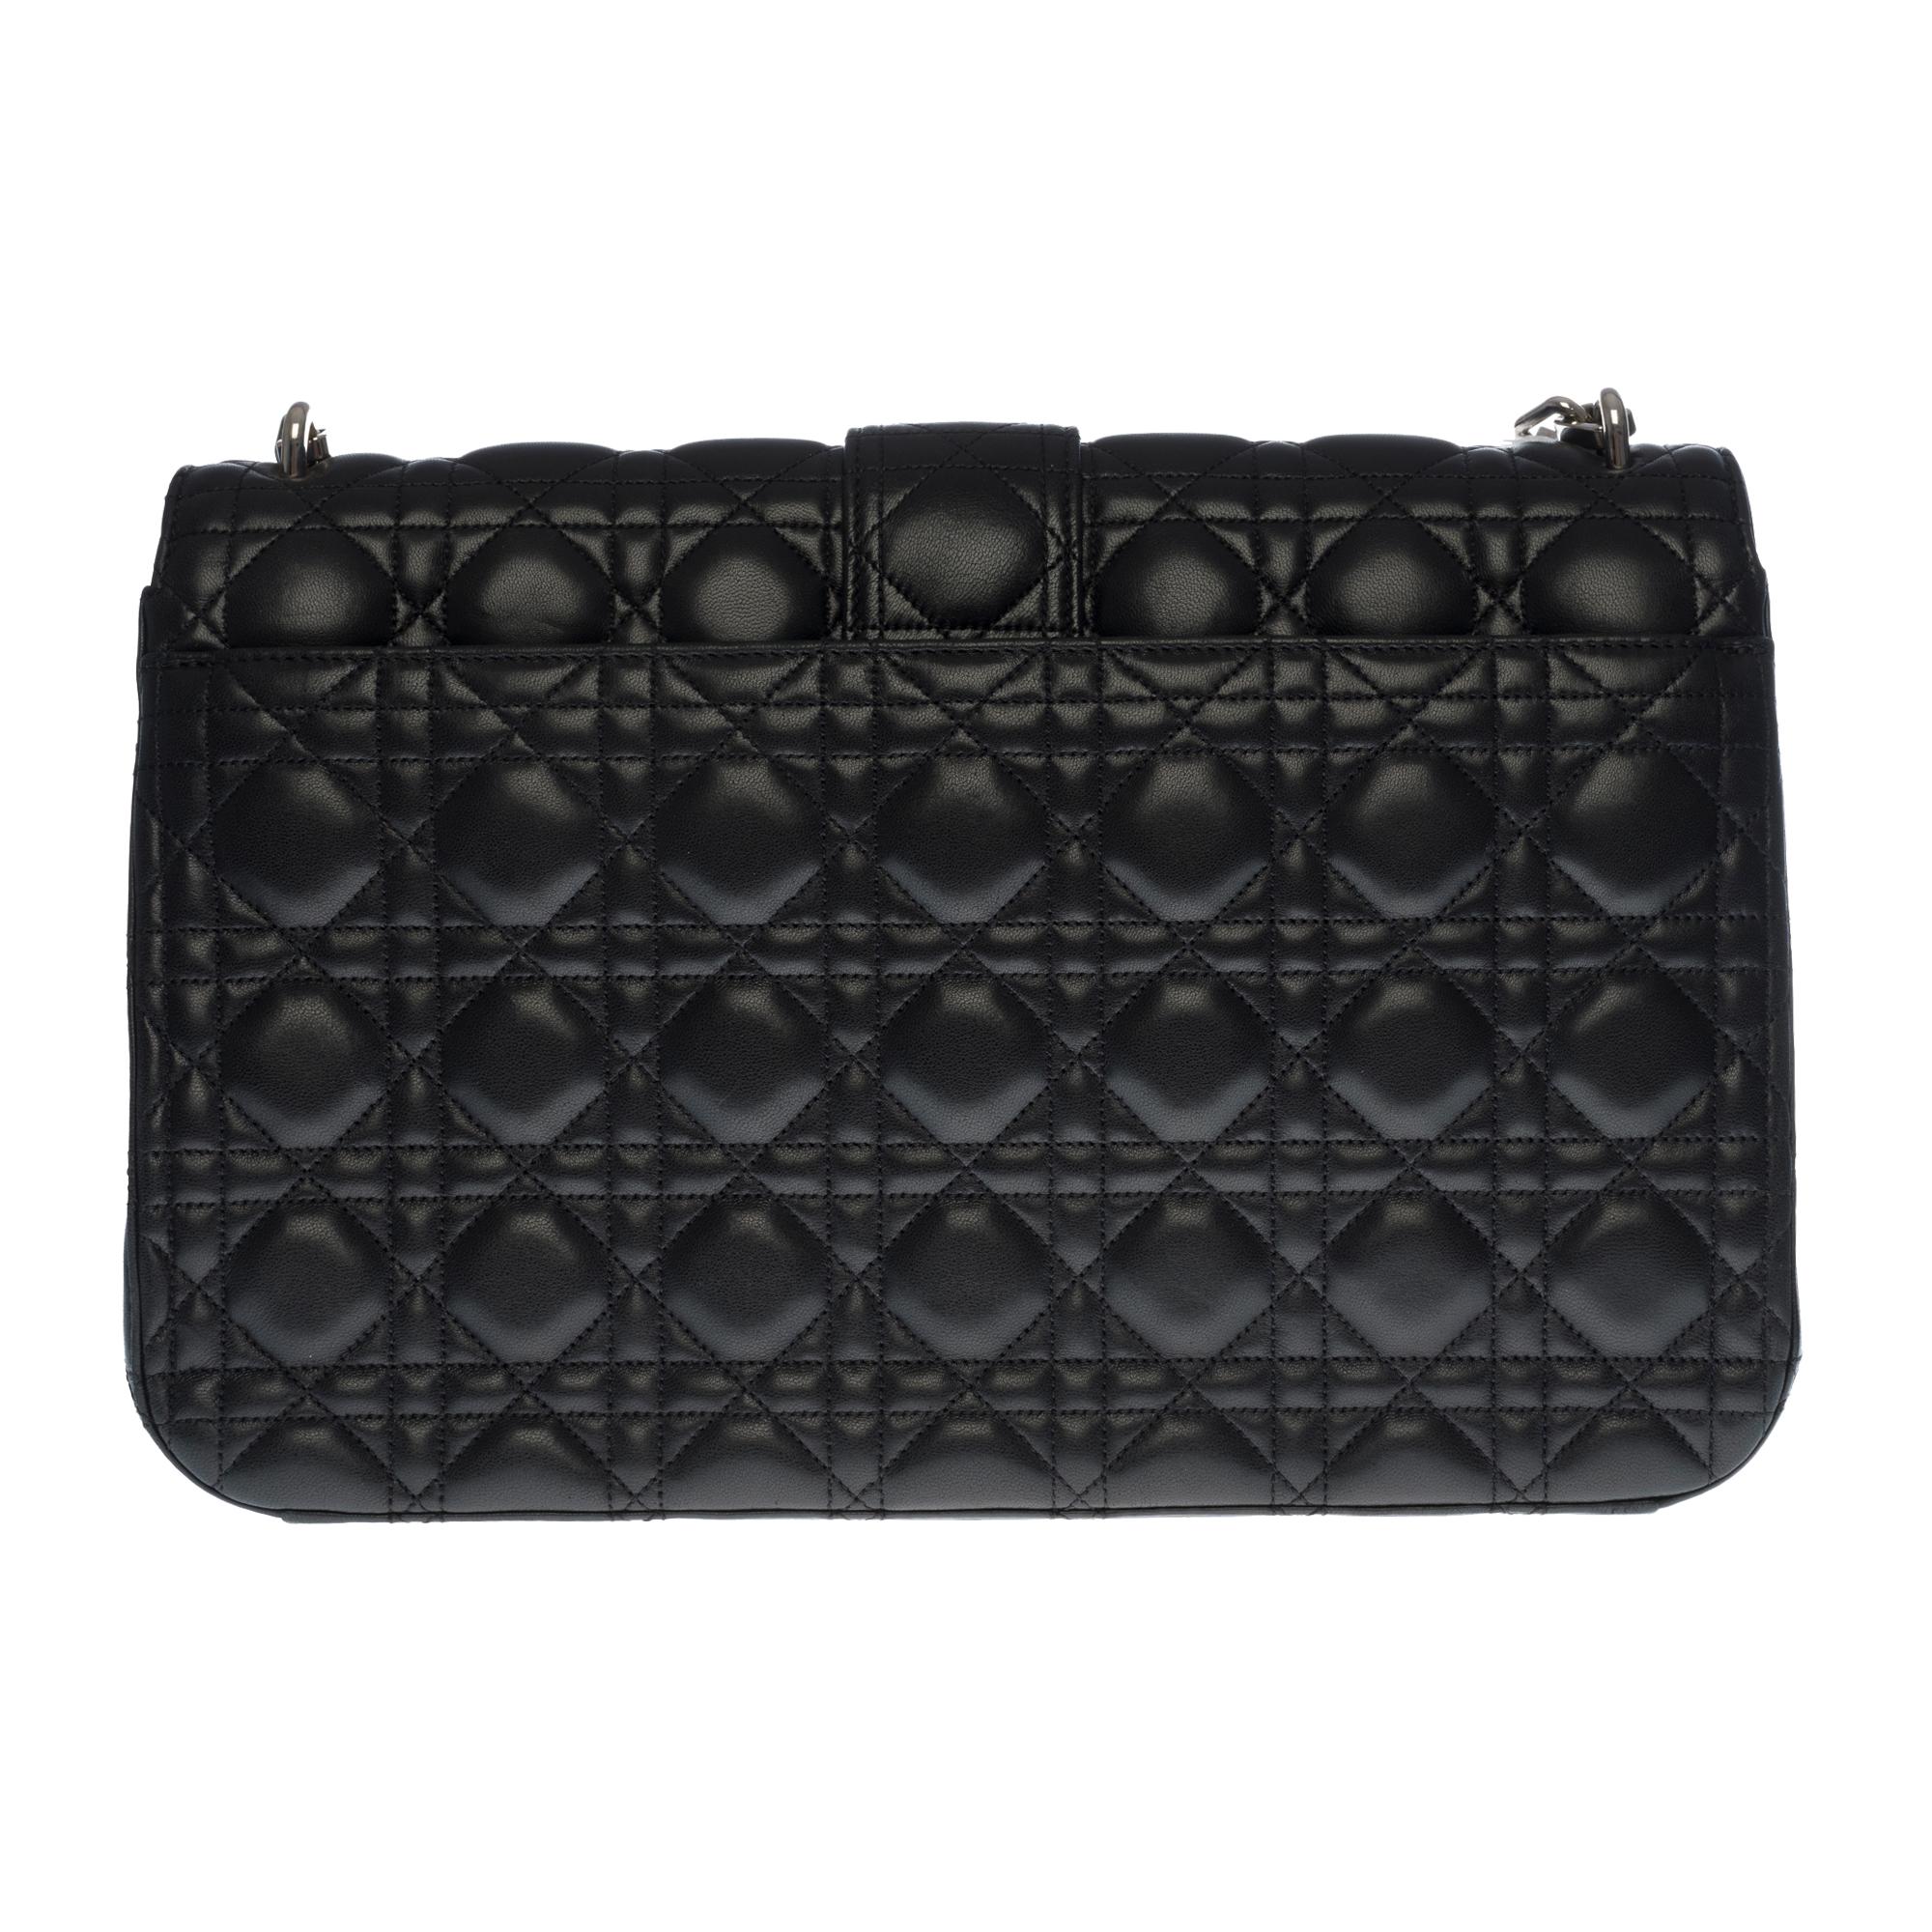 Beautiful Dior Miss Dior handbag in black cannage quilted leather , silver metal hardware, a silver metal chain handle allowing a hand or shoulder support

One silver metal flip latch closure
A patch pocket on the back of the bag
Pink leather